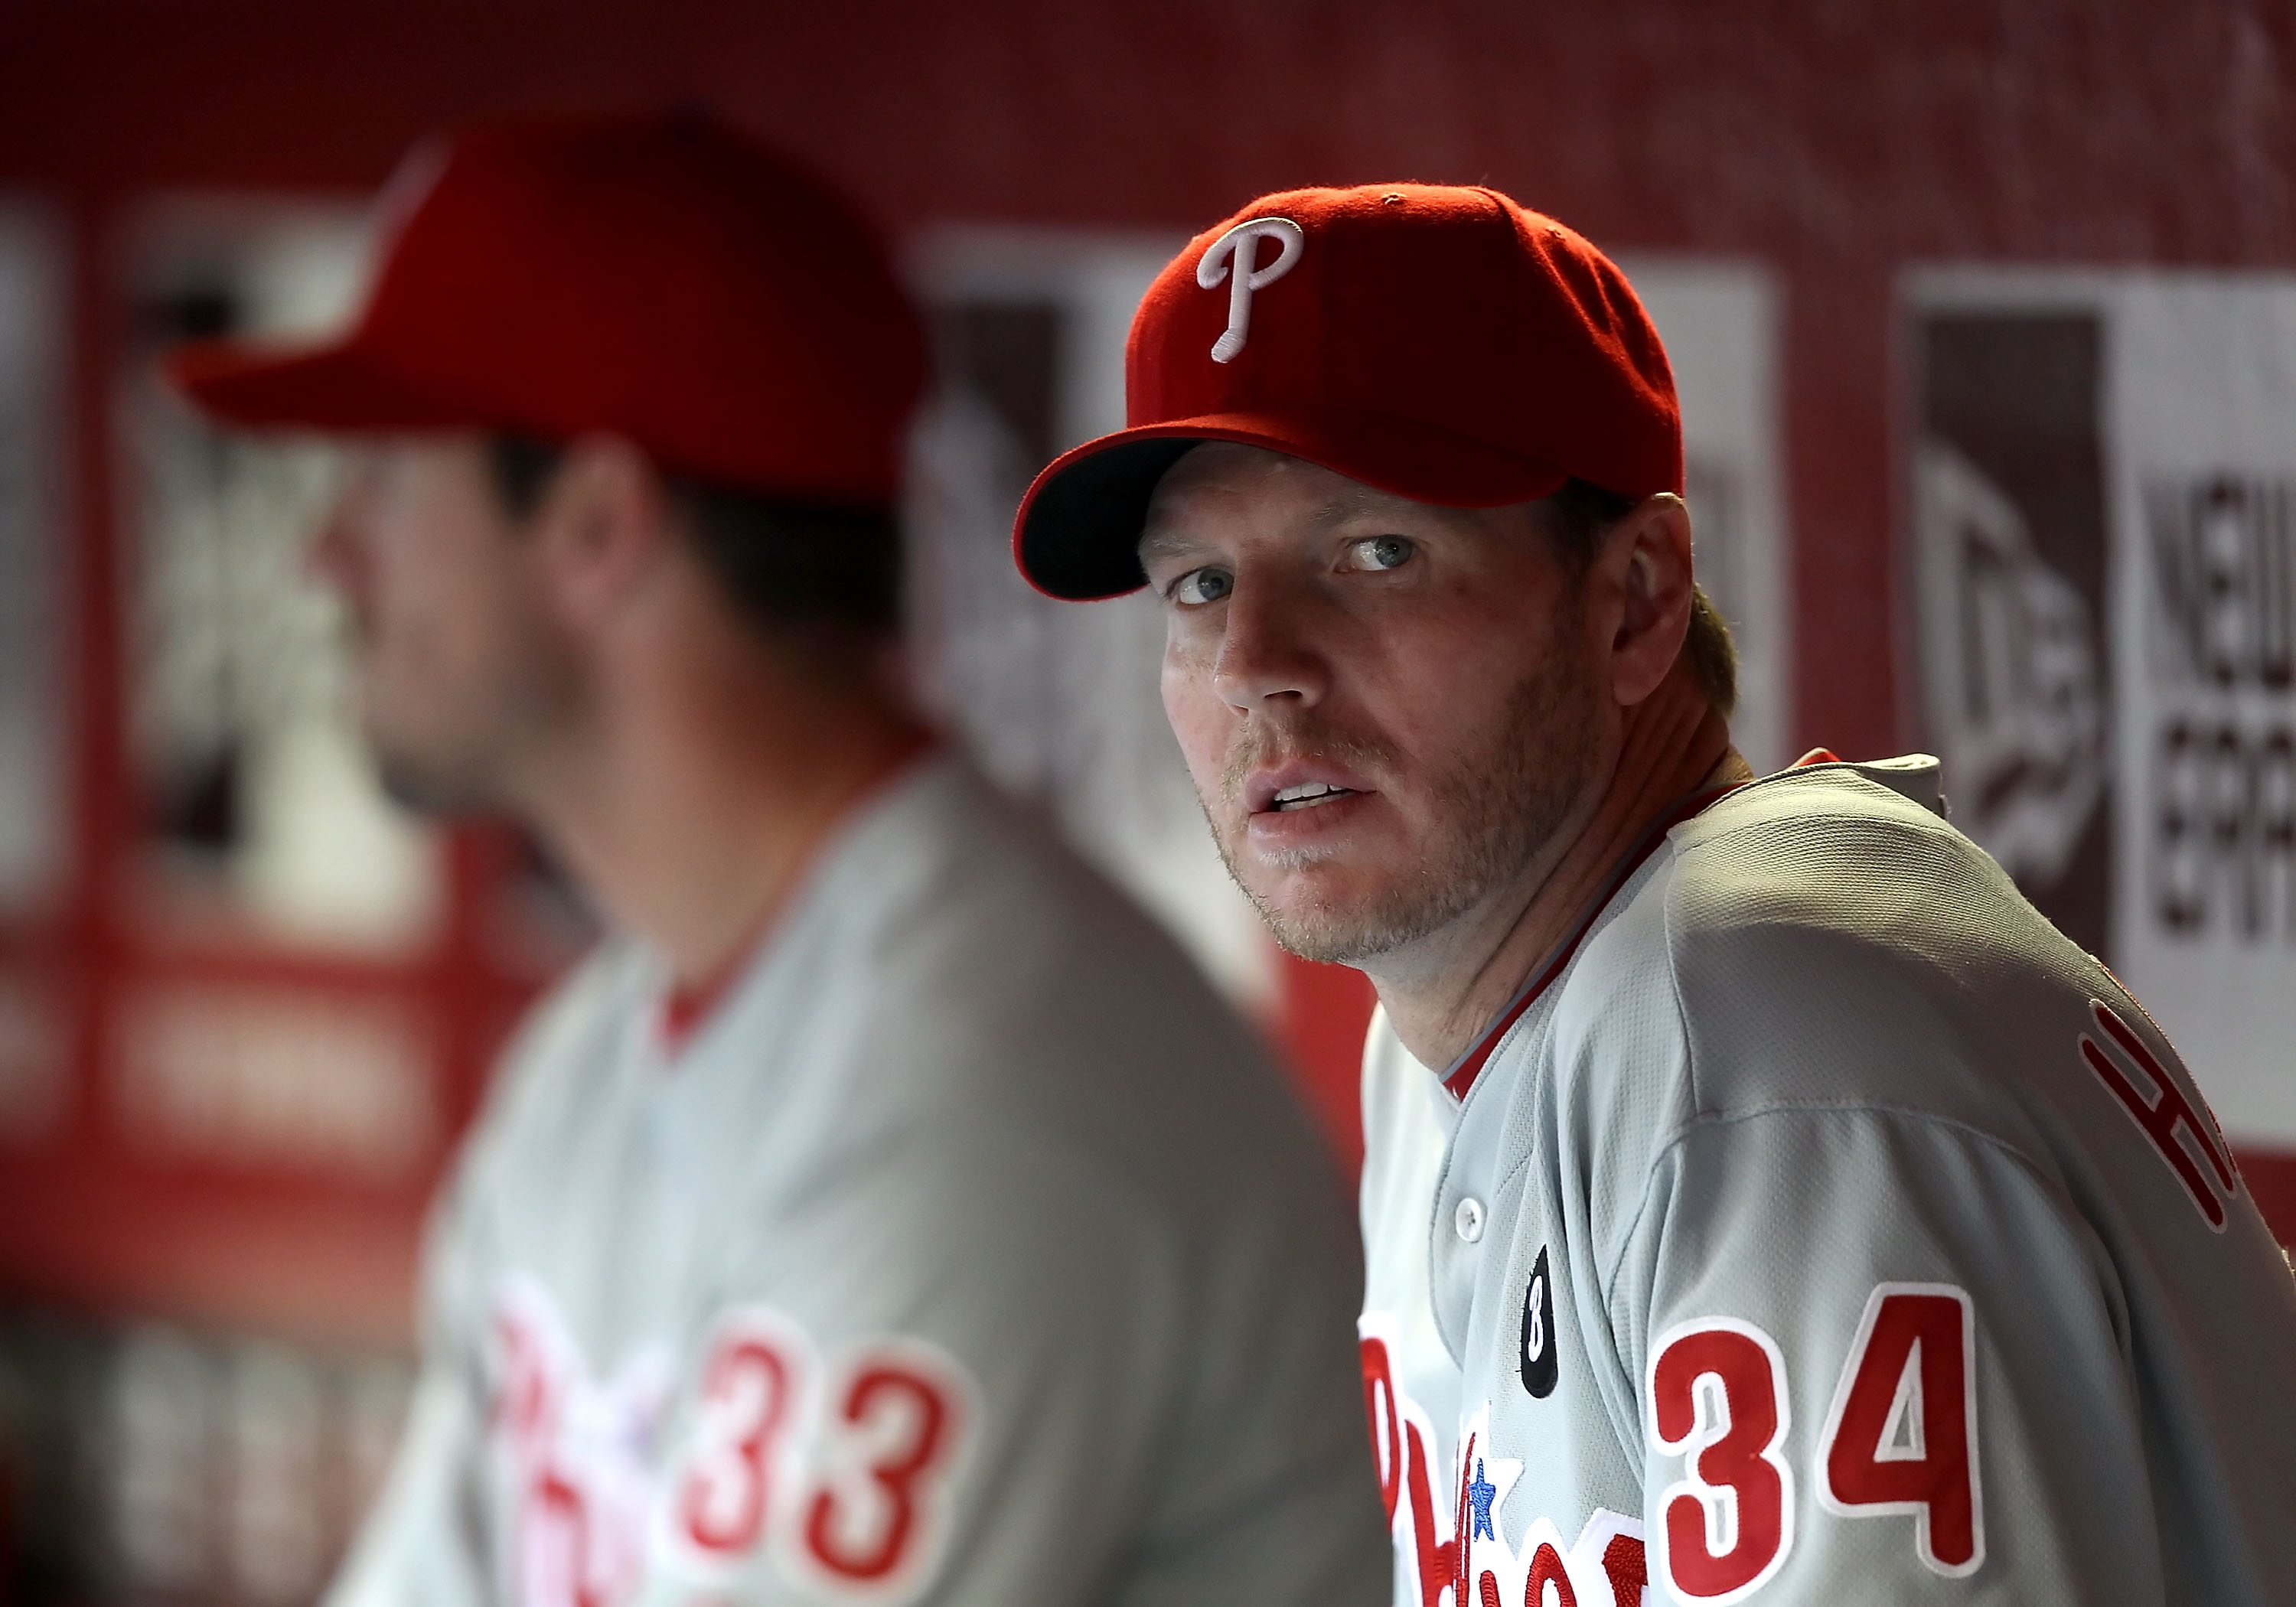 PHOENIX, AZ - APRIL 26:  Pitcher Roy Halladay #34 (R) and Cliff Lee #33 of the Philadelphia Phillies sit in the dugout during the Major League Baseball game against the Arizona Diamondbacks at Chase Field on April 26, 2011 in Phoenix, Arizona.  (Photo by